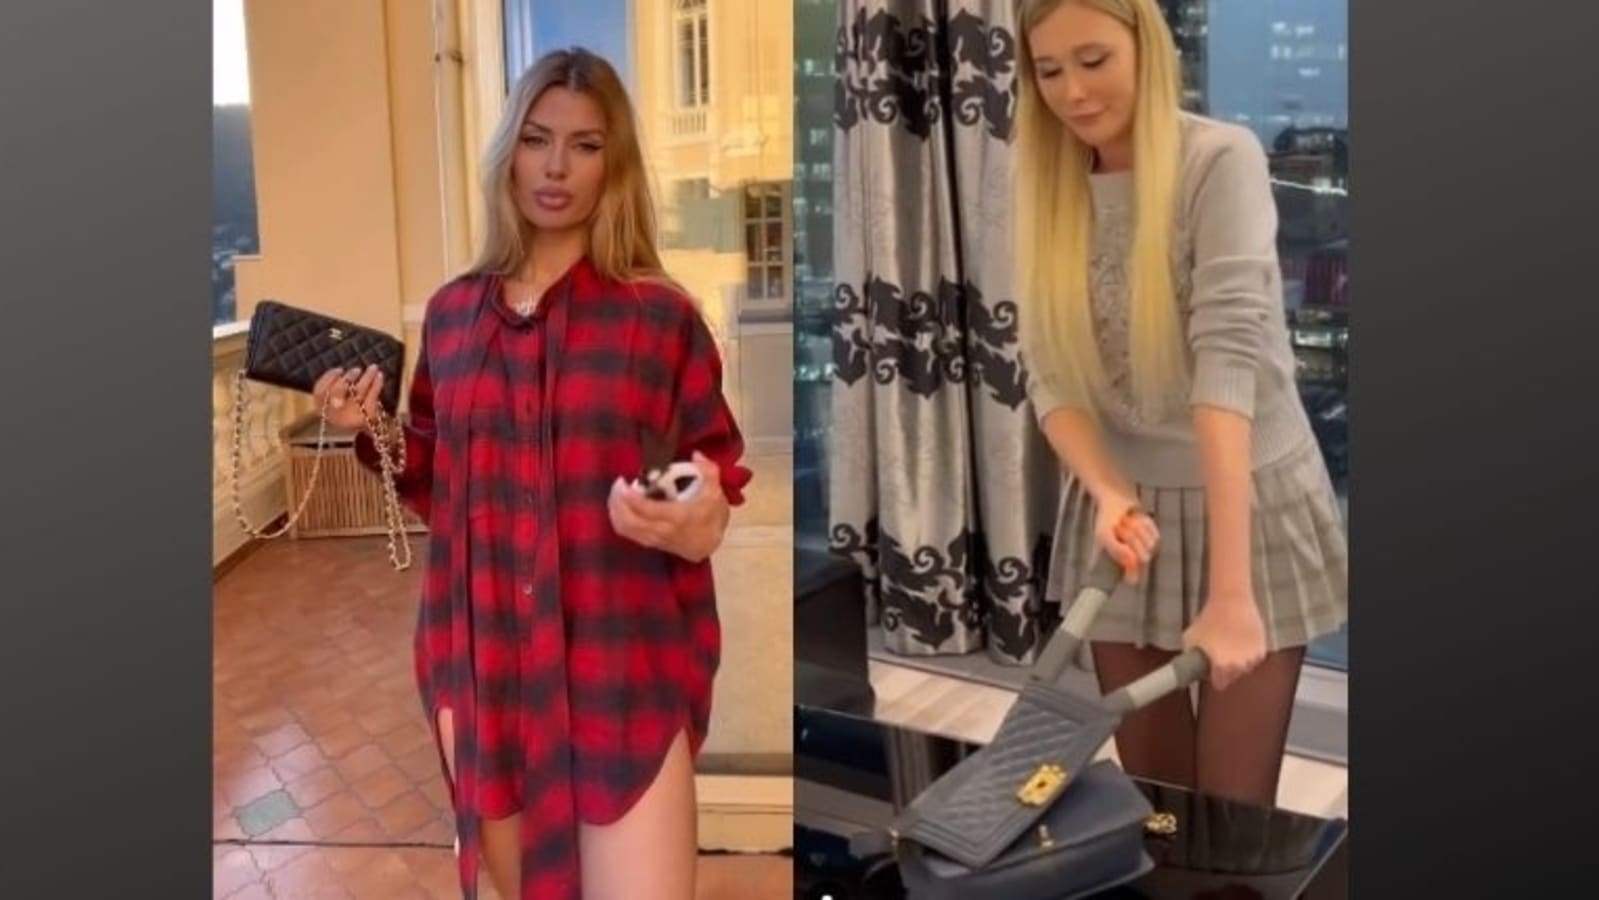 Ukraine war: Why Russian influencers, models tearing their Chanel bags